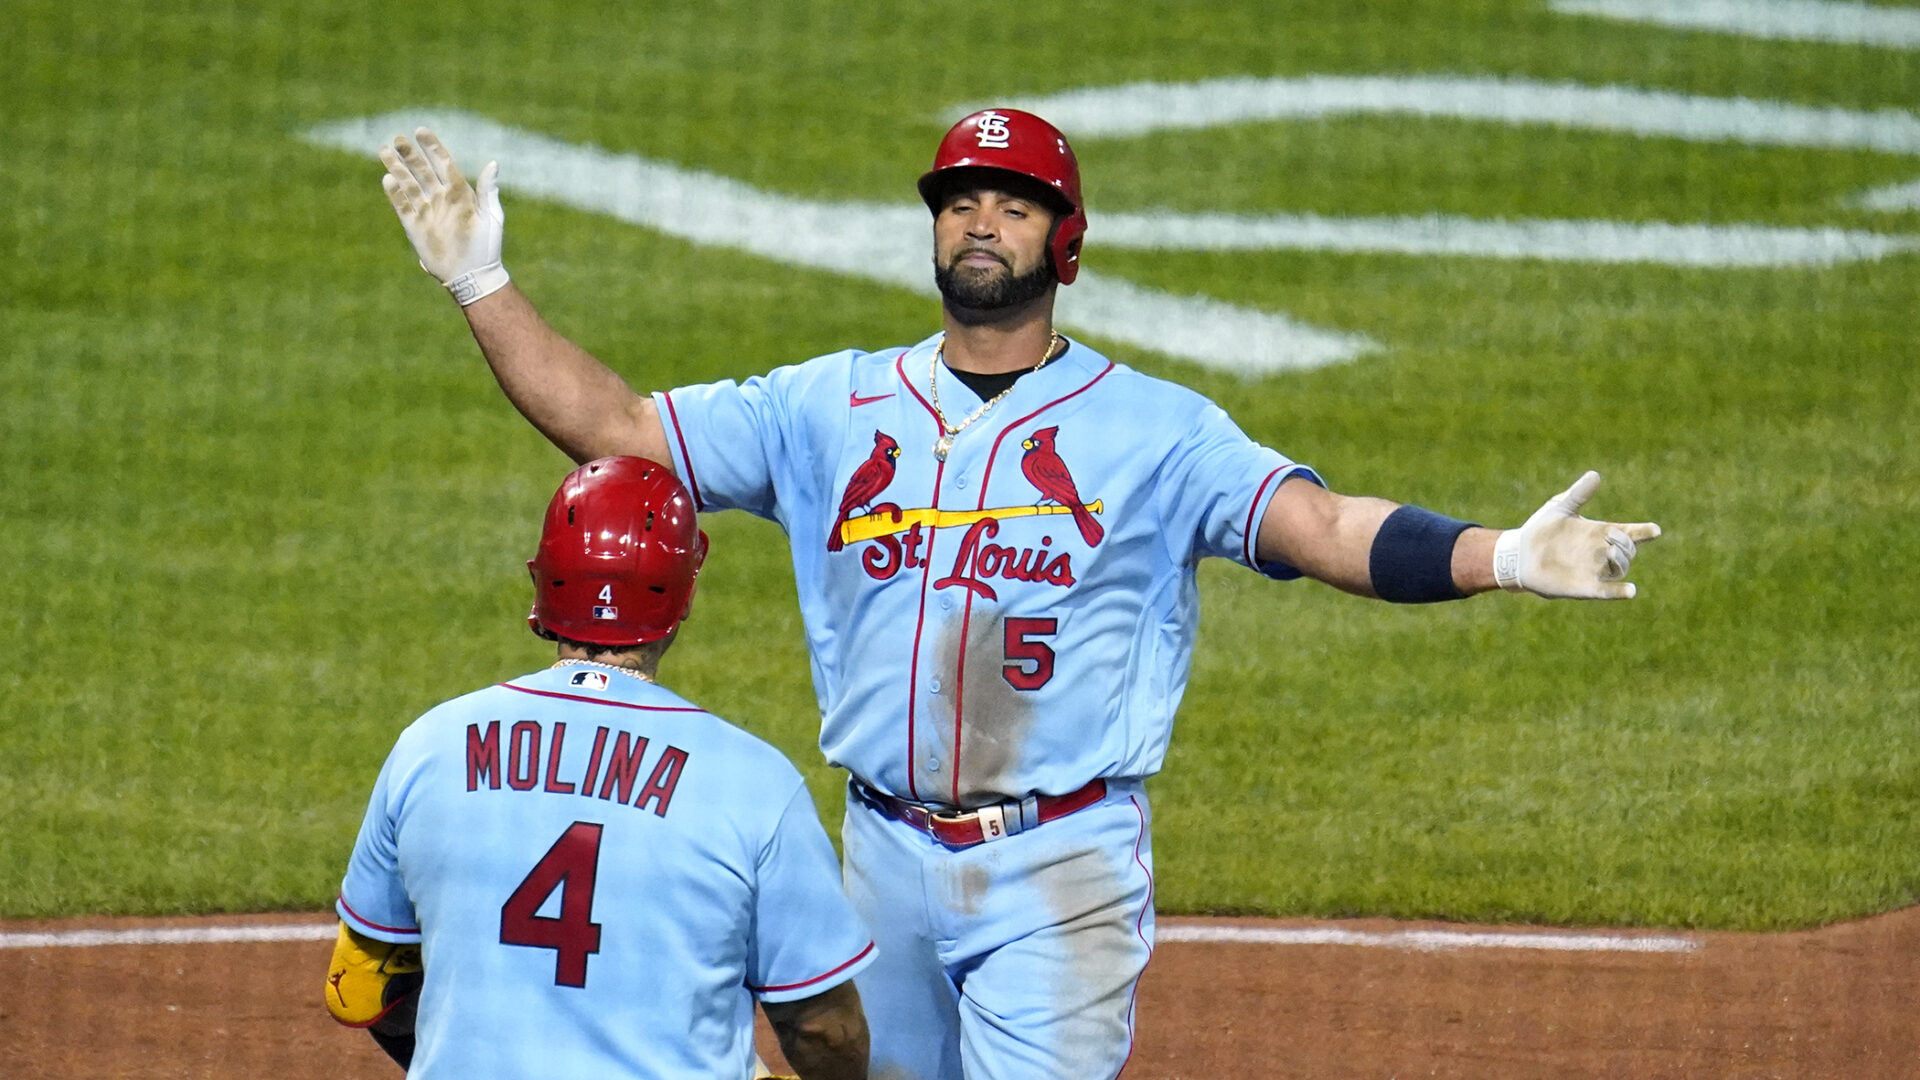 Albert Pujols returns to St. Louis for one last season with the